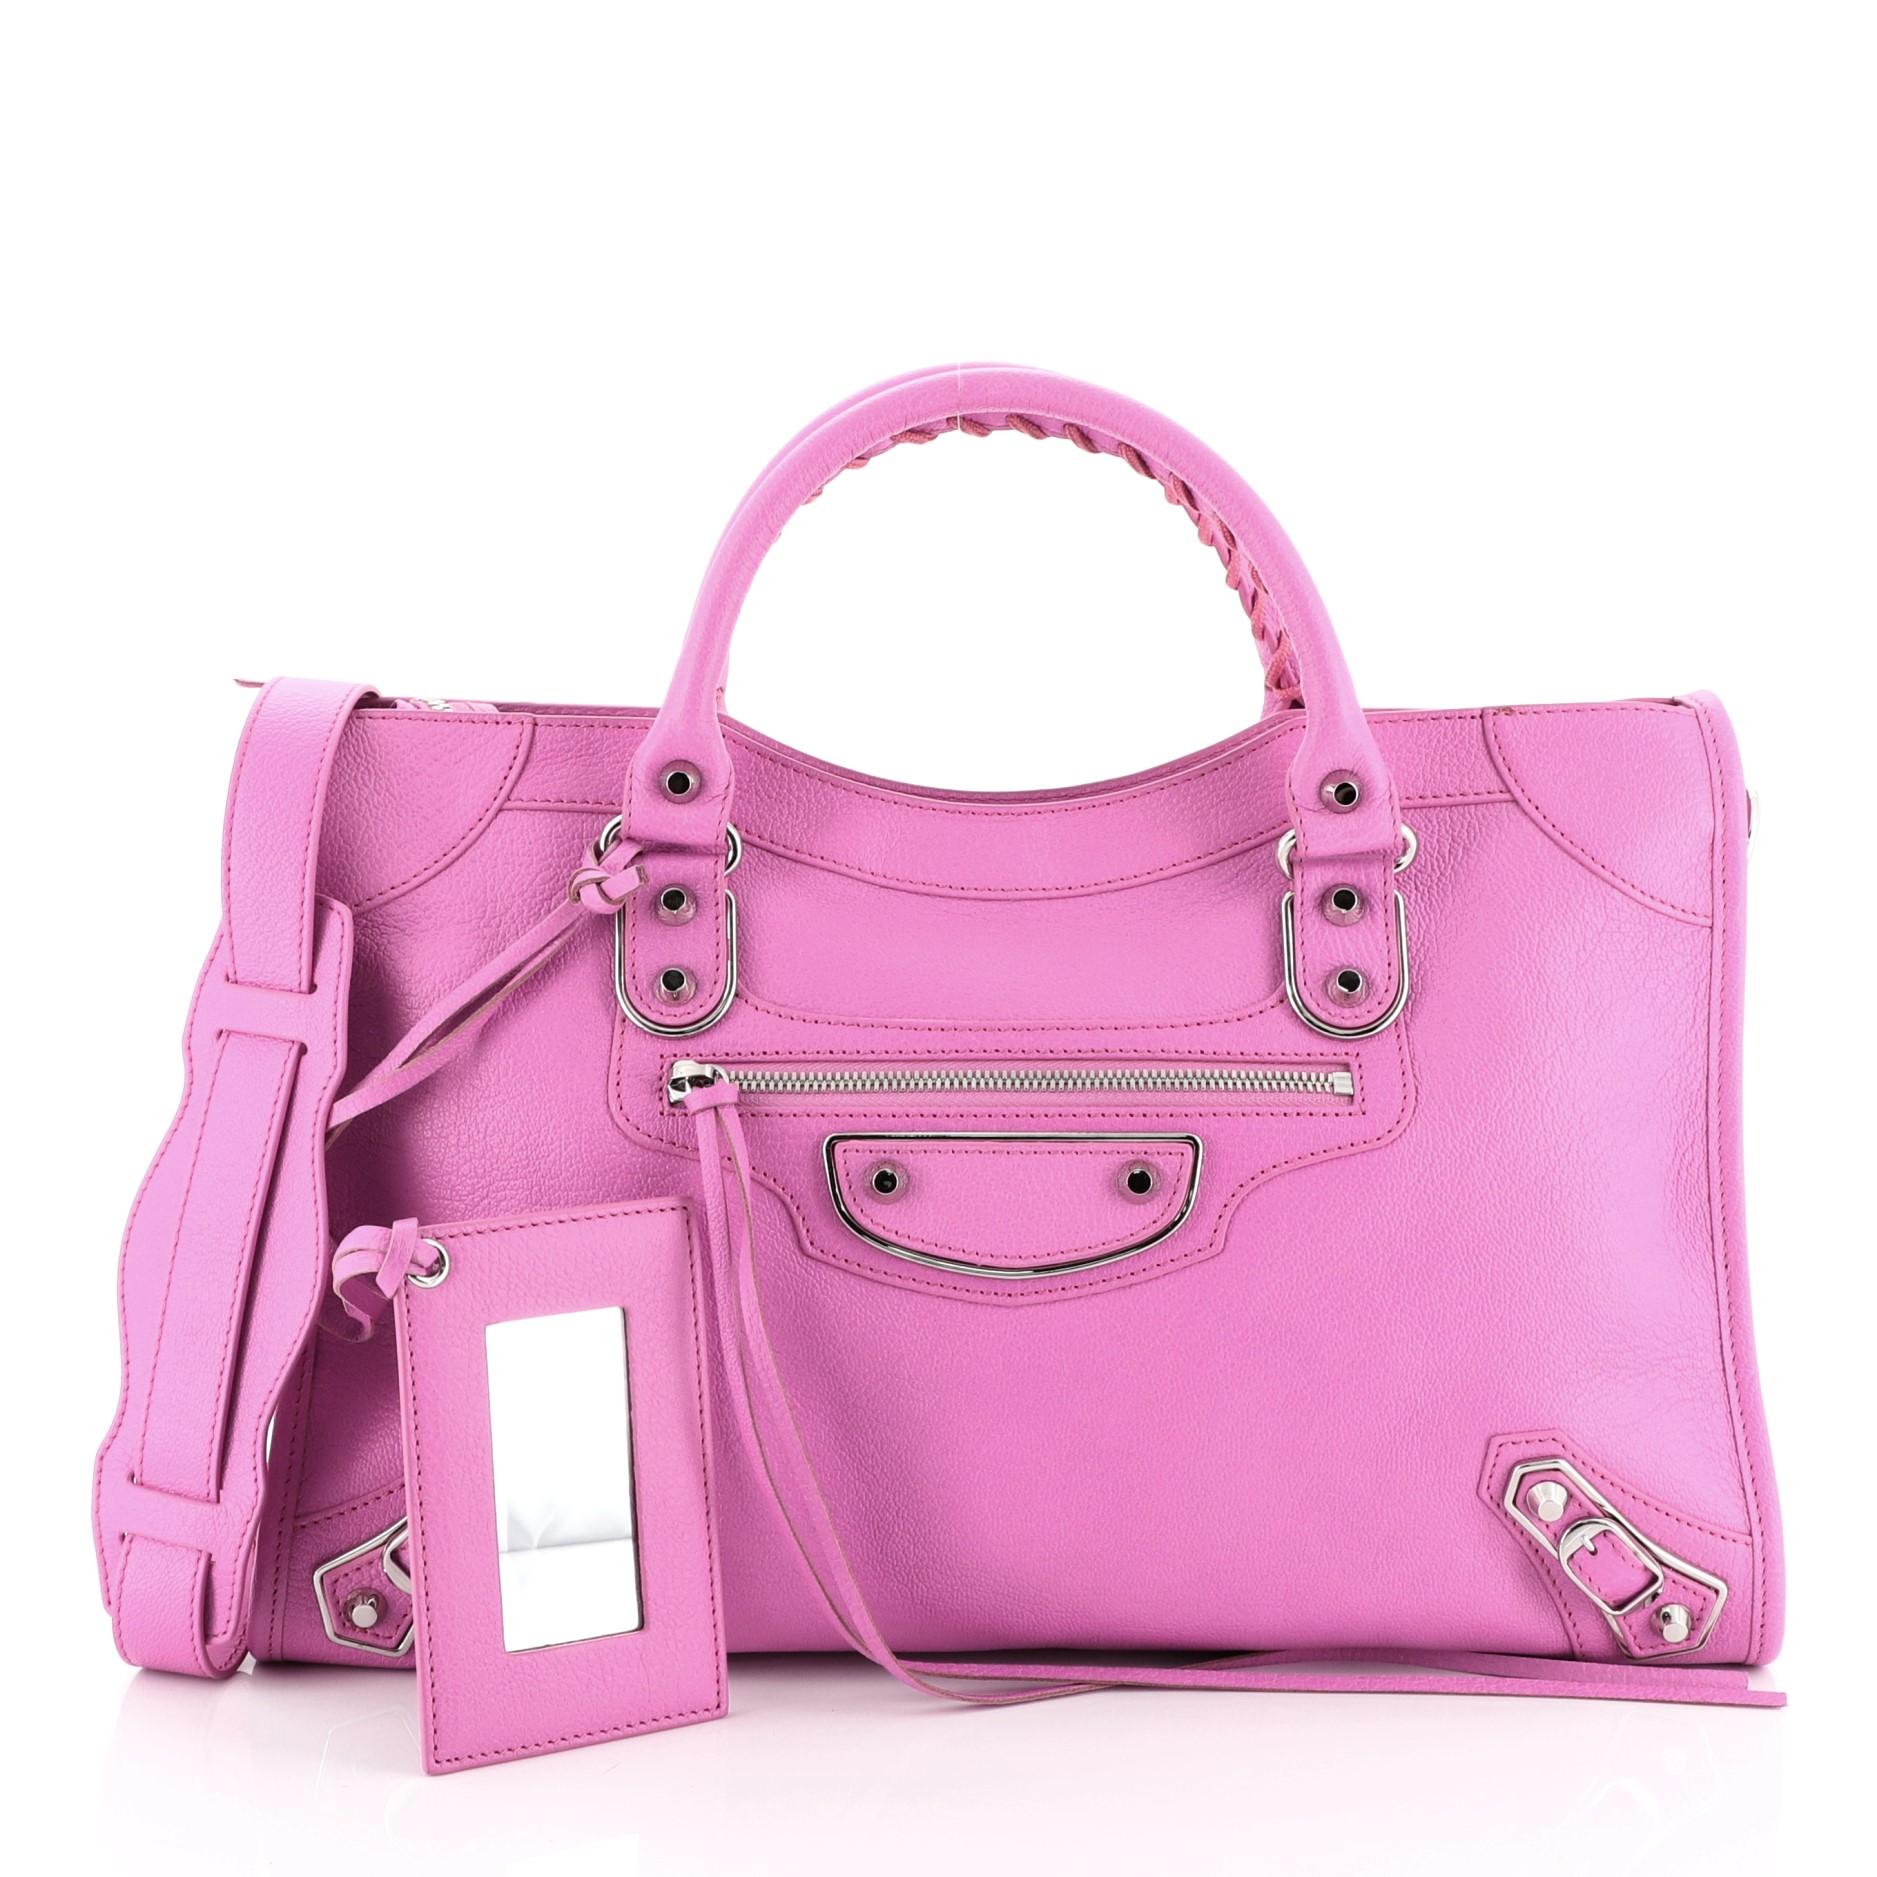 This Balenciaga City Classic Metallic Edge Bag Leather Medium, crafted from pink leather, features dual braided woven handles, studs and buckle details, front zip pocket, and silver-tone hardware. Its top zip closure opens to a black fabric interior